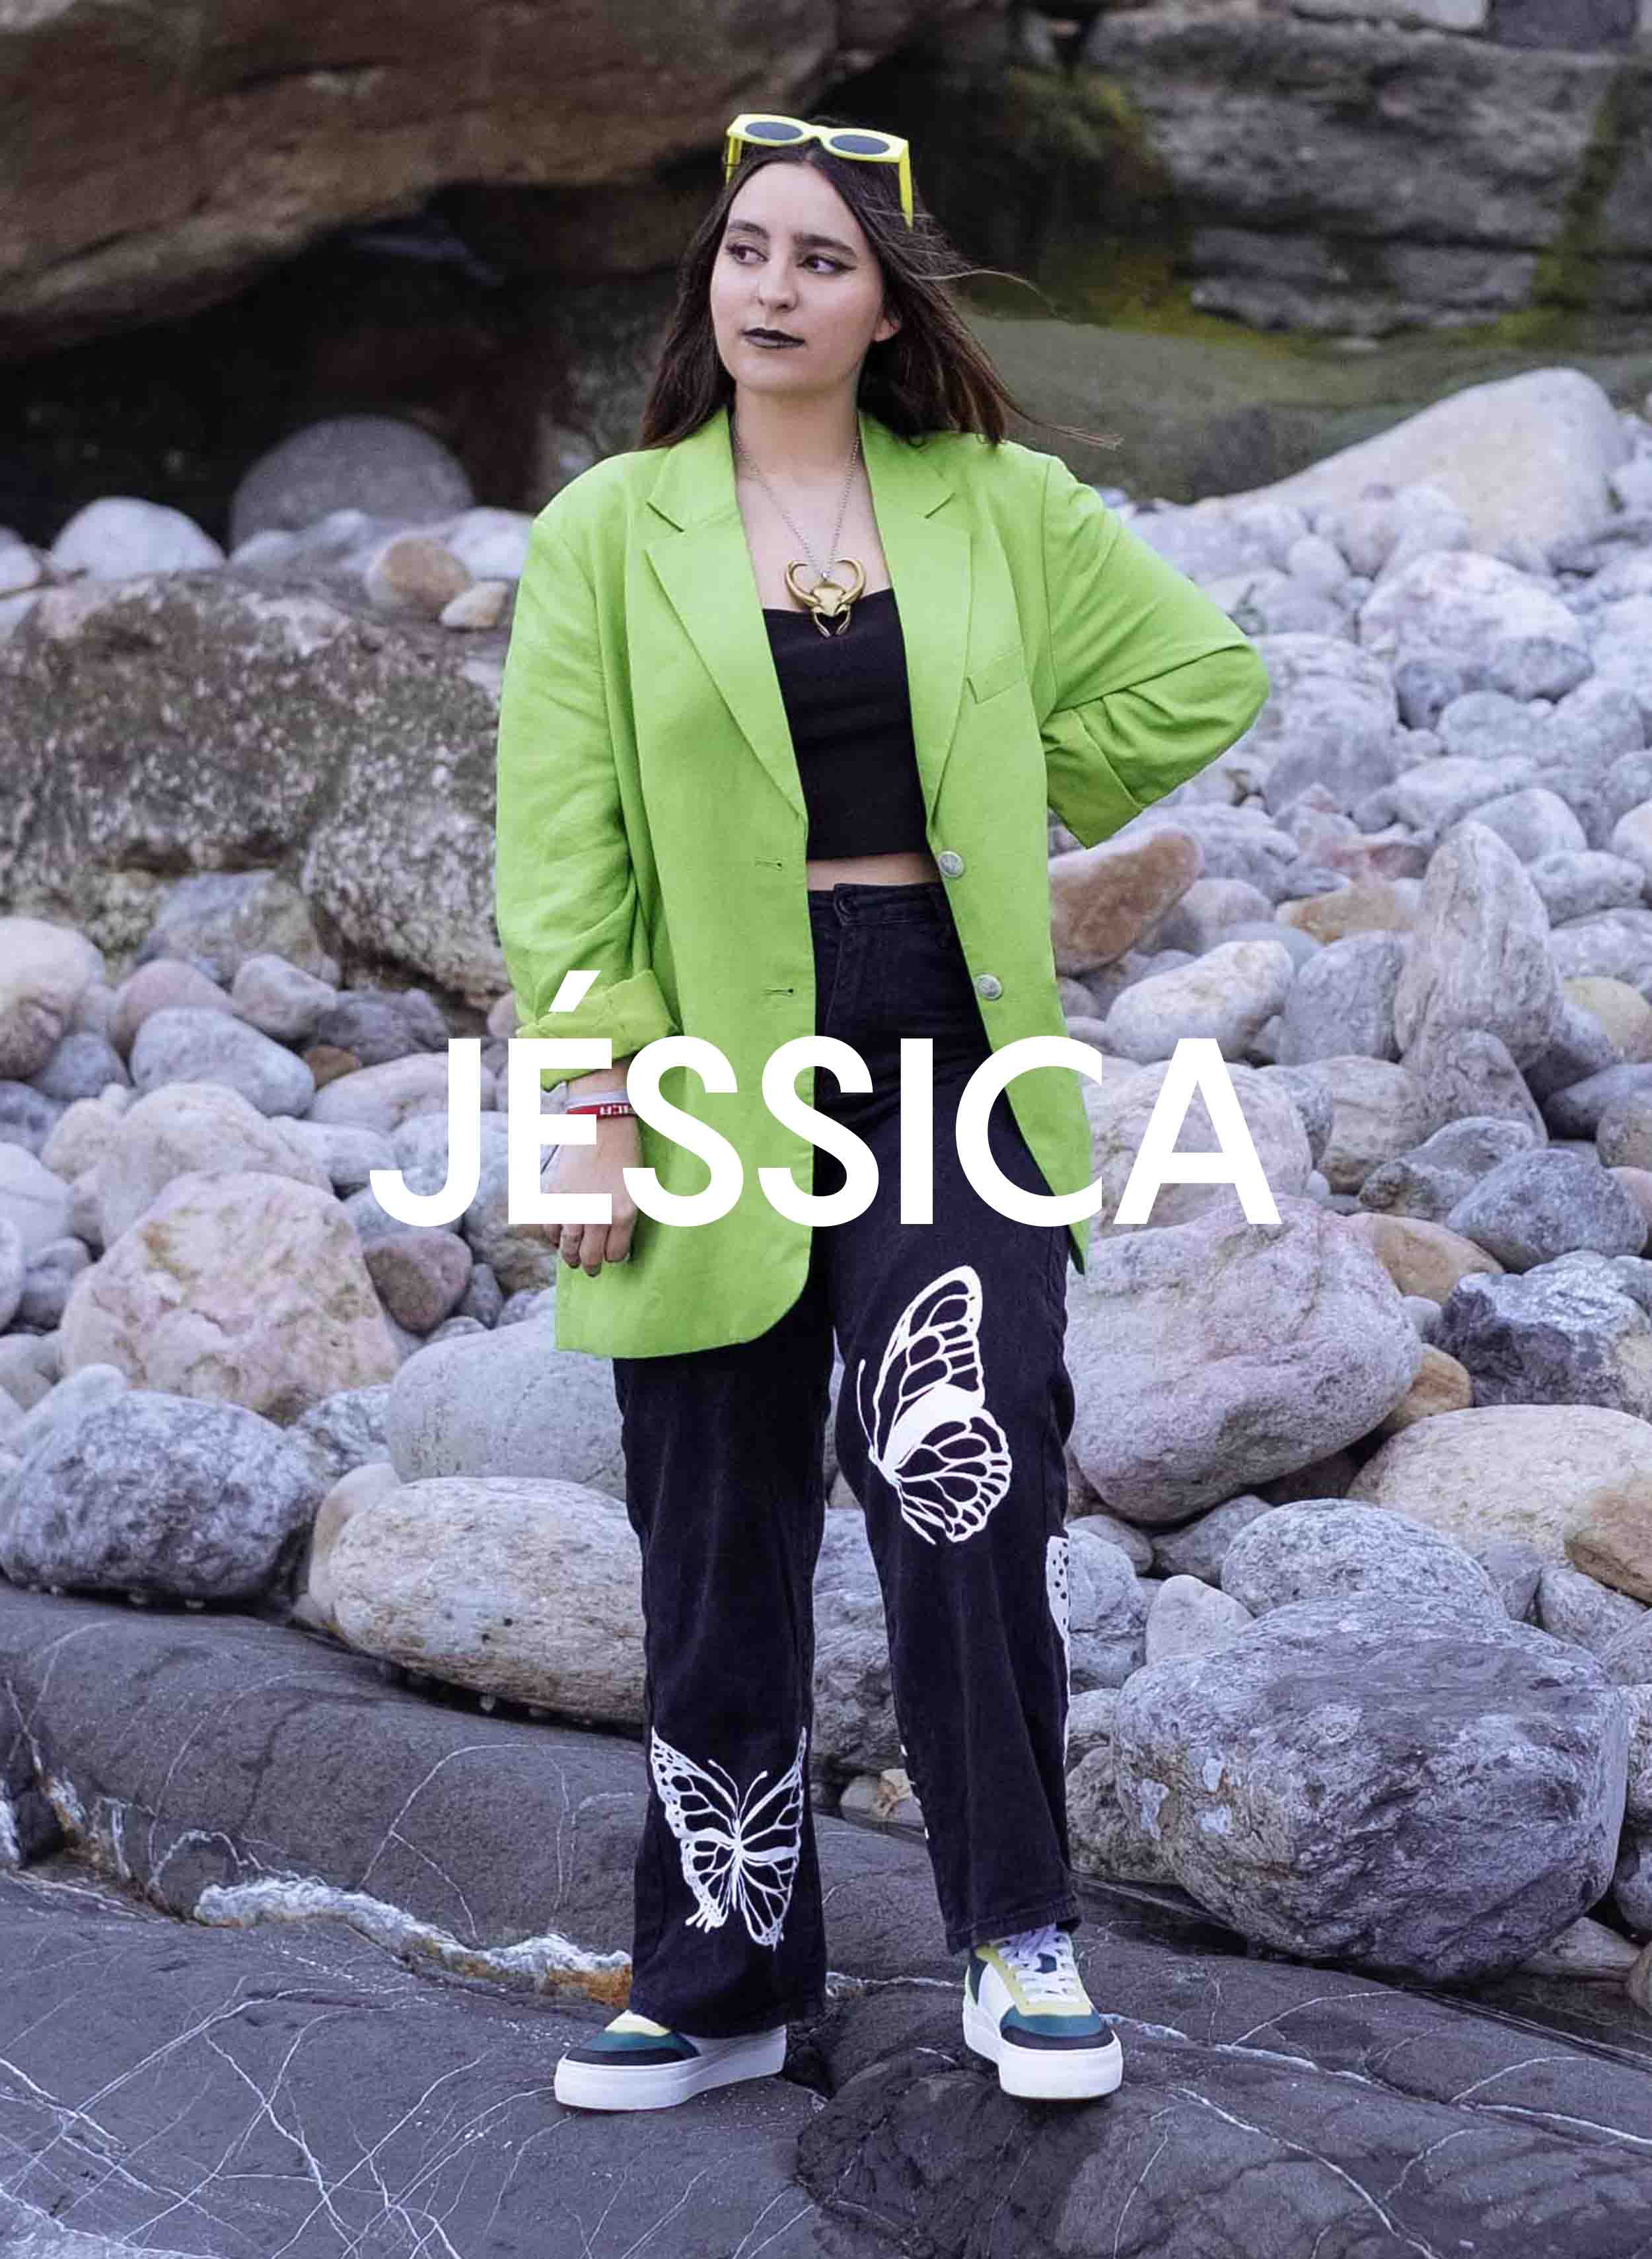 Jessica in a green jacket and black pants standing on rocks, wearing Diverge sneakers, promoting social impact and custom shoes throught the imagine project.